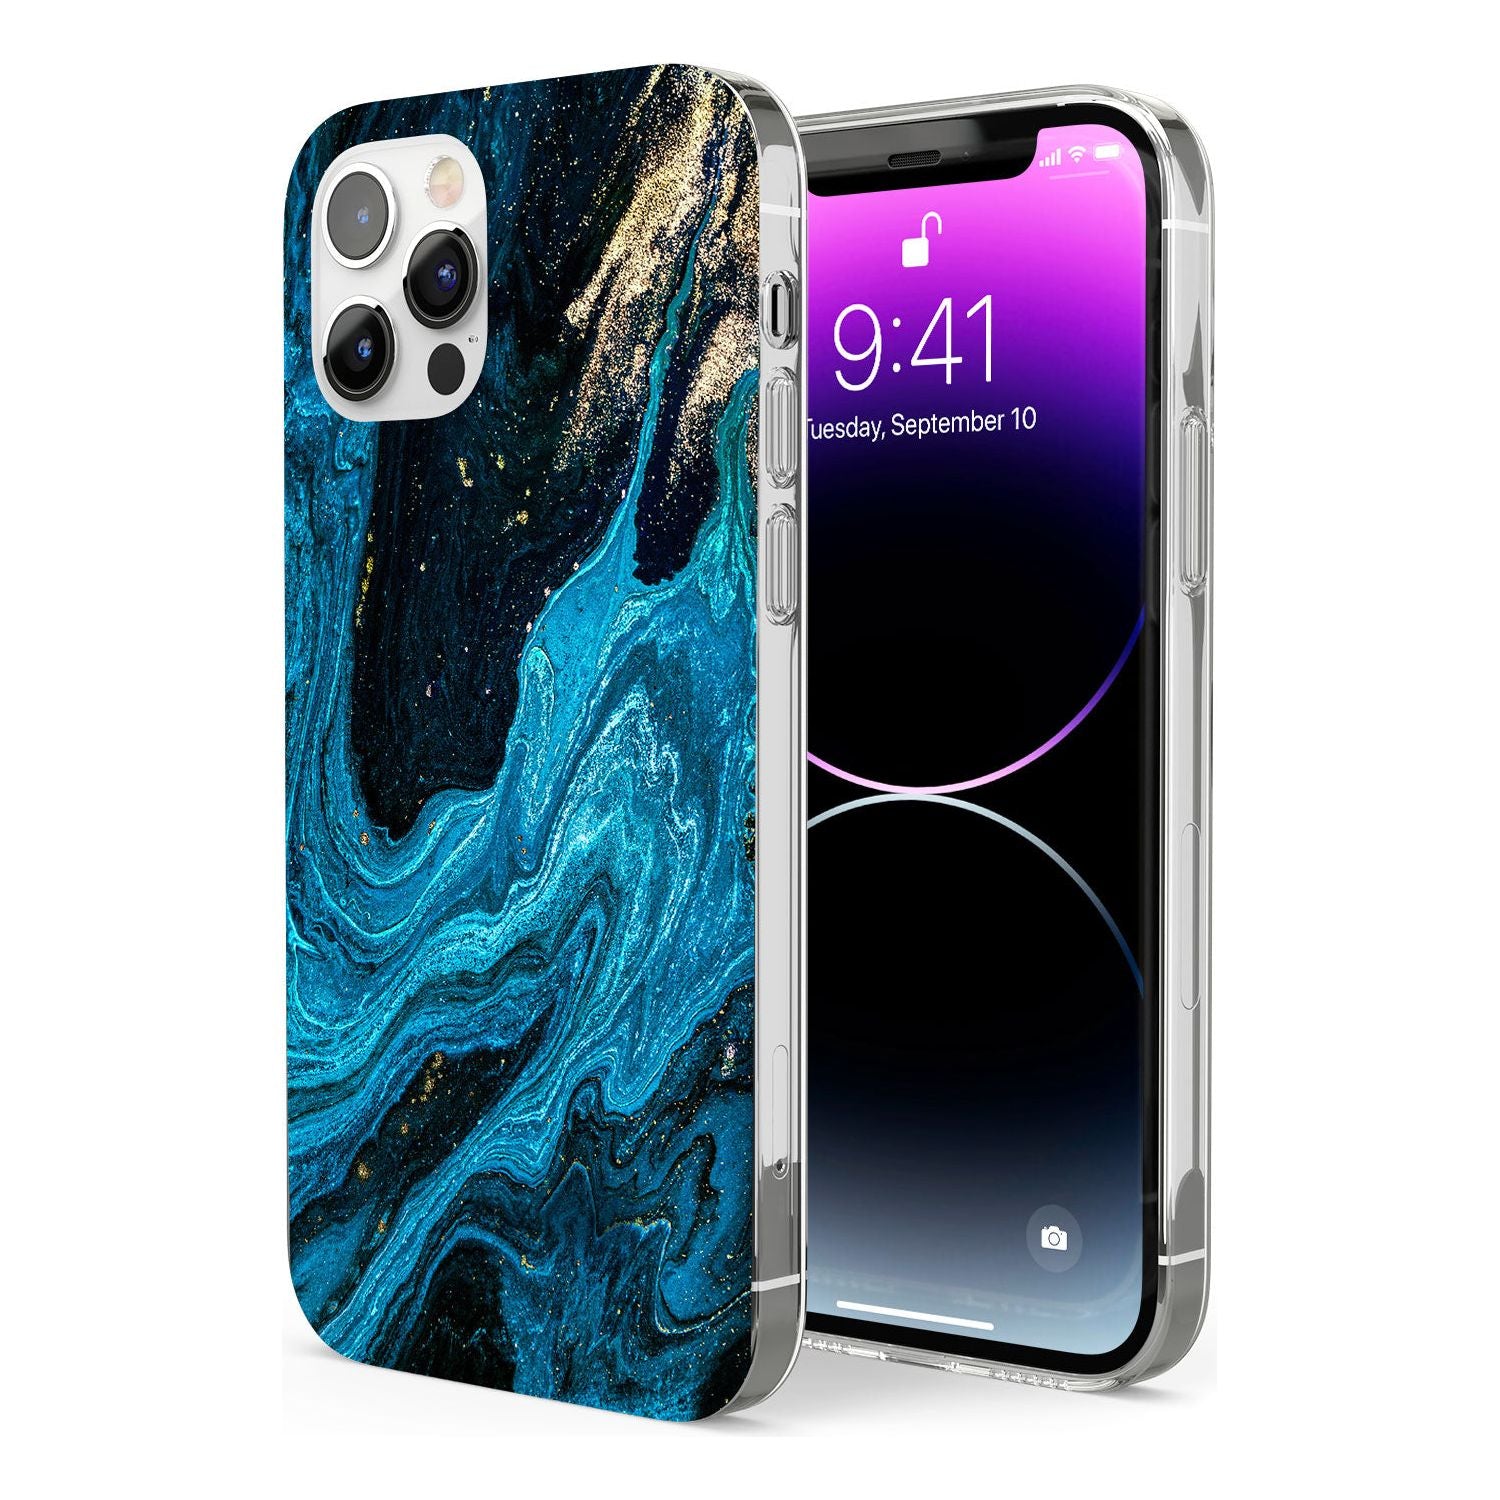 Saphire Lagoon Phone Case for iPhone 12 Pro